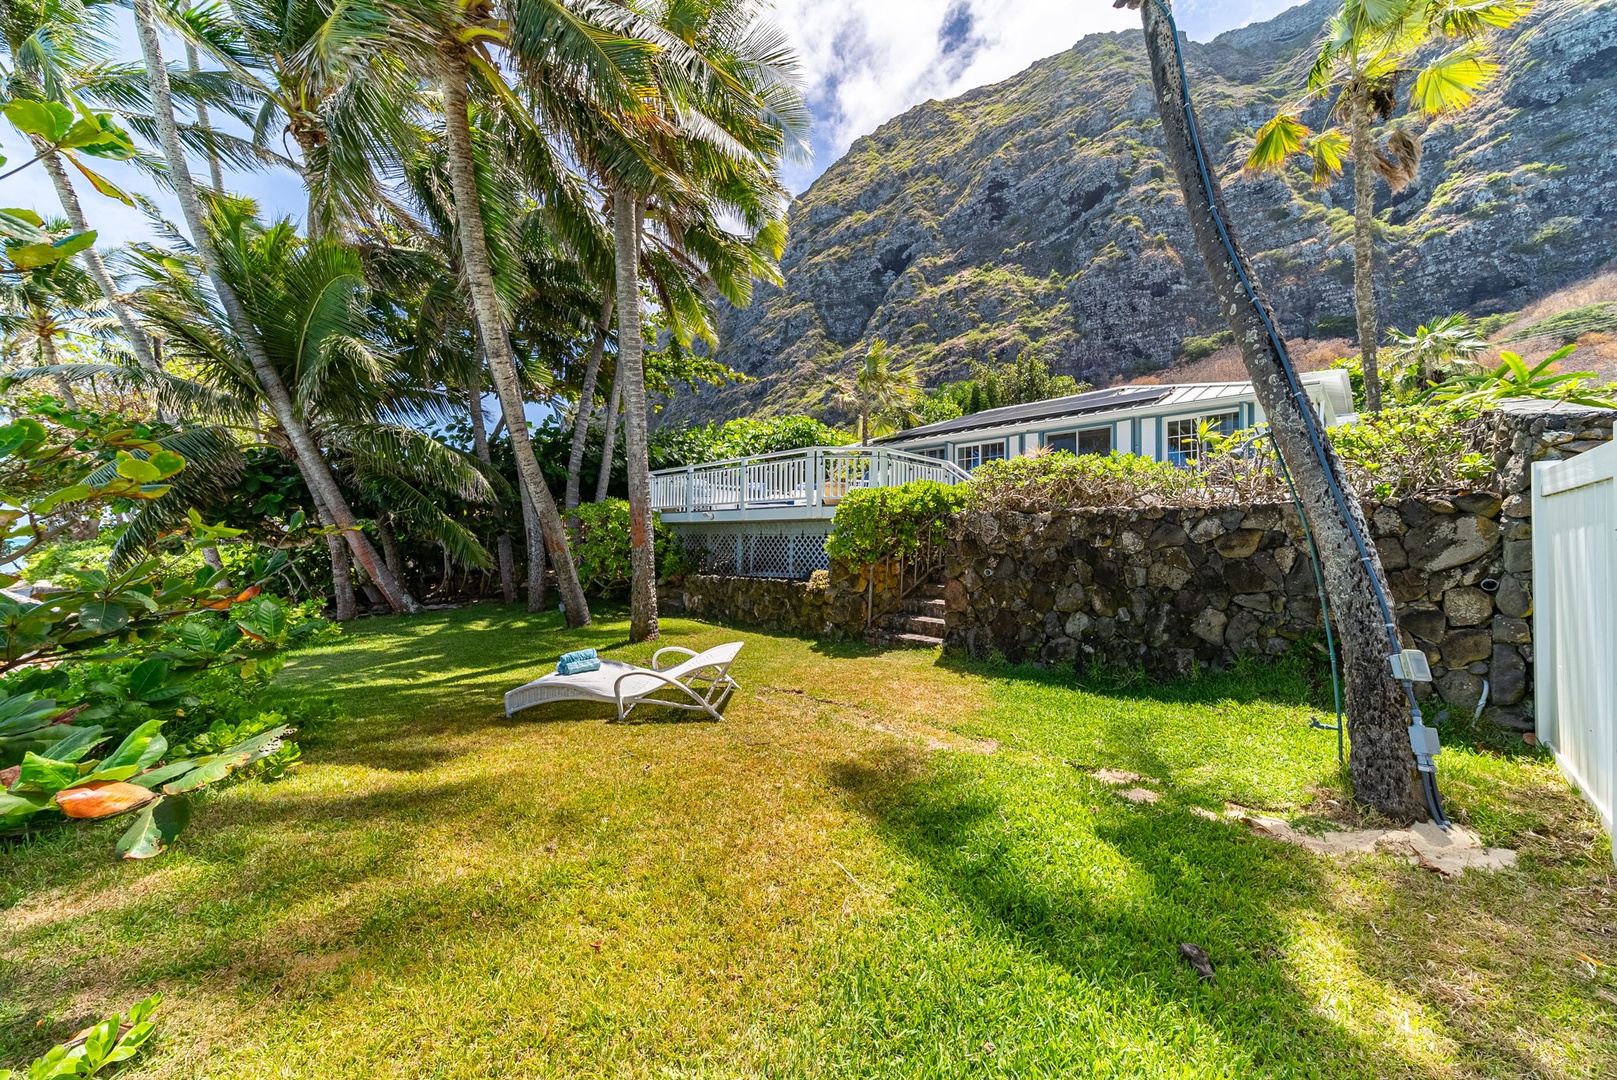 Waimanalo Vacation Rentals, Mana Kai at Waimanalo - Relax on the chaise lounge amidst a lush grassy expanse, with the luxurious home and majestic mountains framing the perfect backdrop.